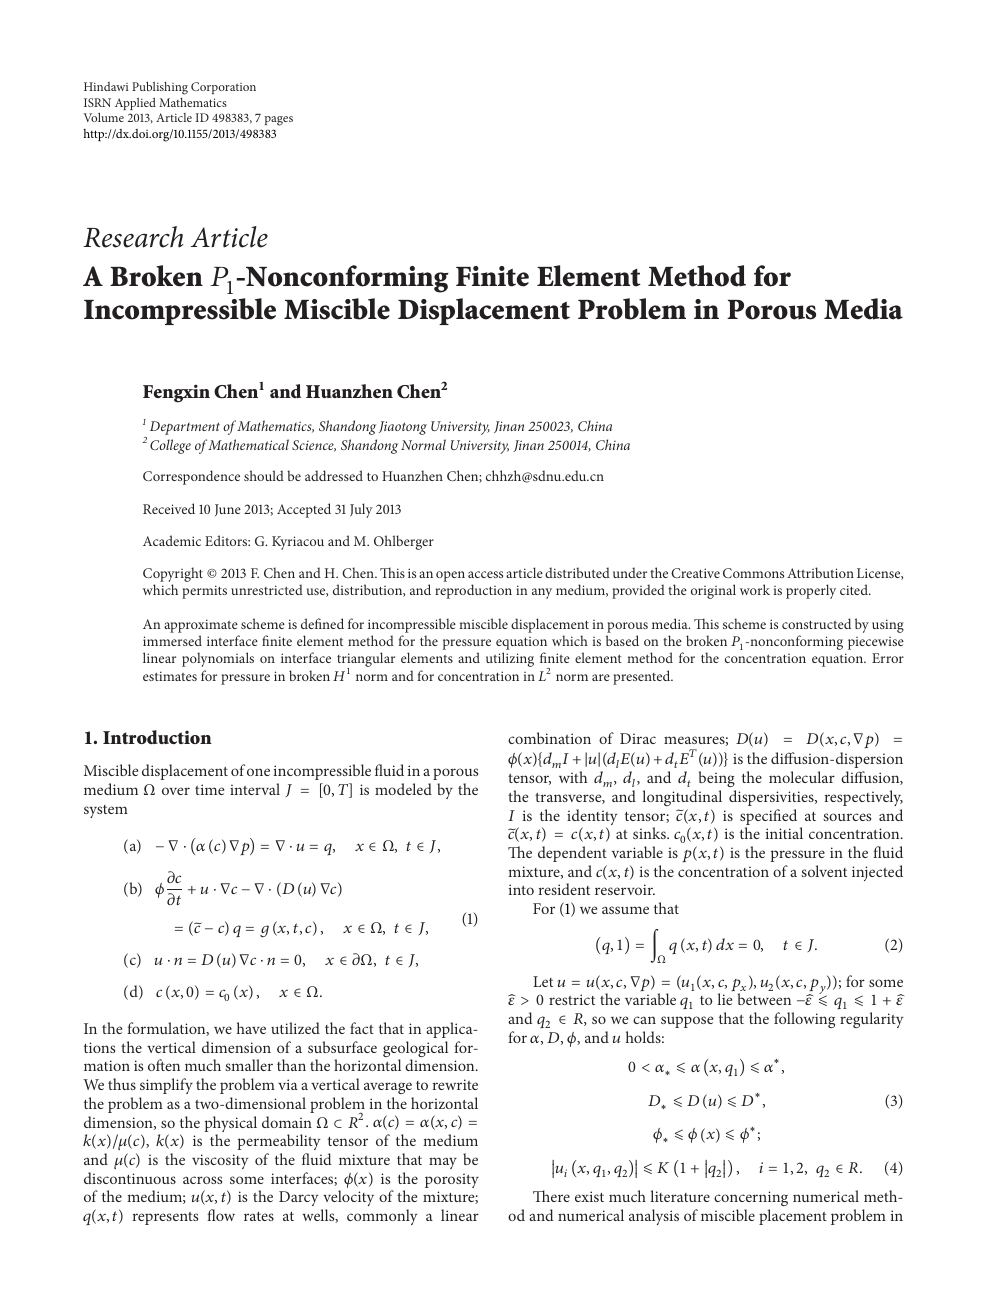 A Broken P 1 Nonconforming Finite Element Method For Incompressible Miscible Displacement Problem In Porous Media Topic Of Research Paper In Mathematics Download Scholarly Article Pdf And Read For Free On